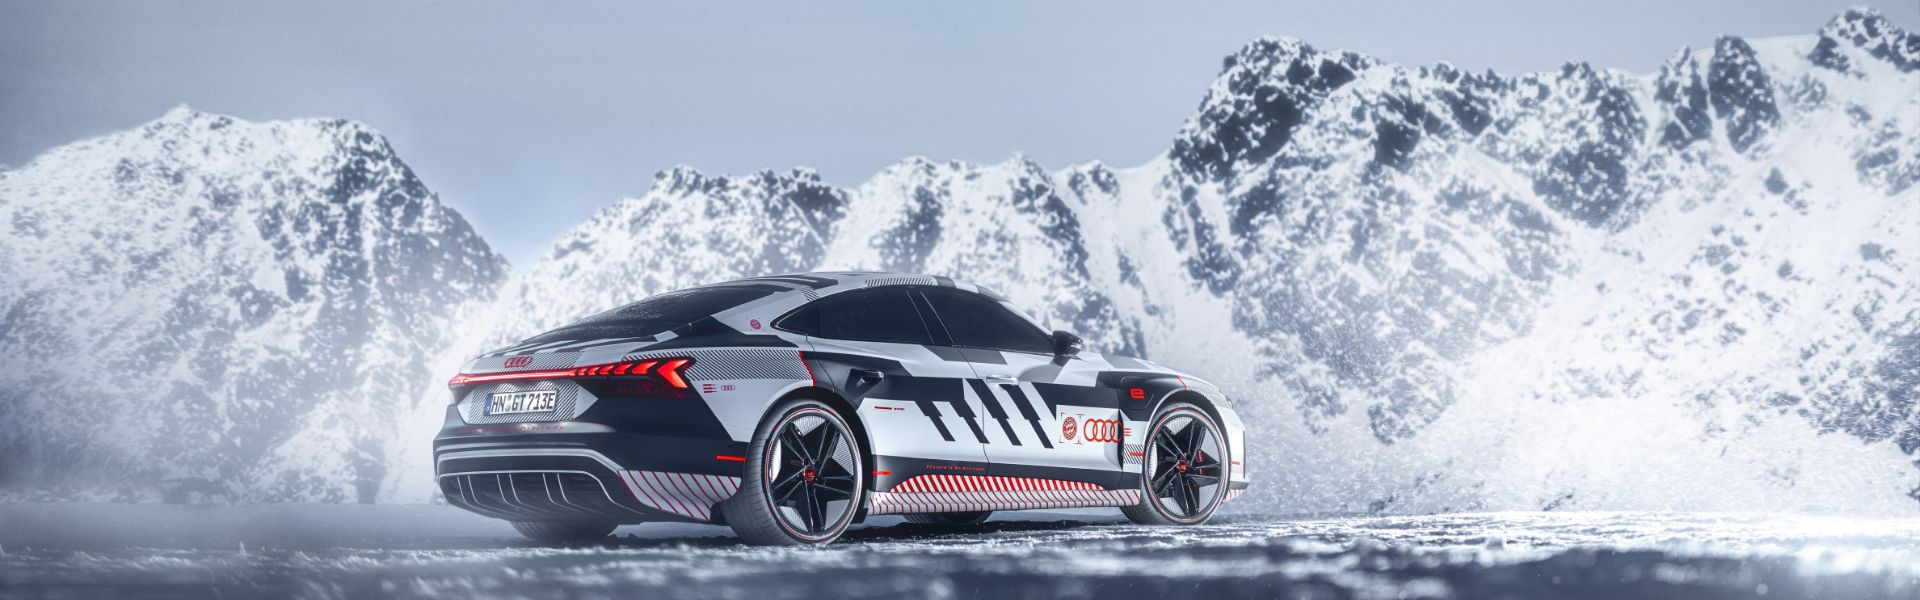 Audi RS e-tron GT in FC Bayern special livery on ice track